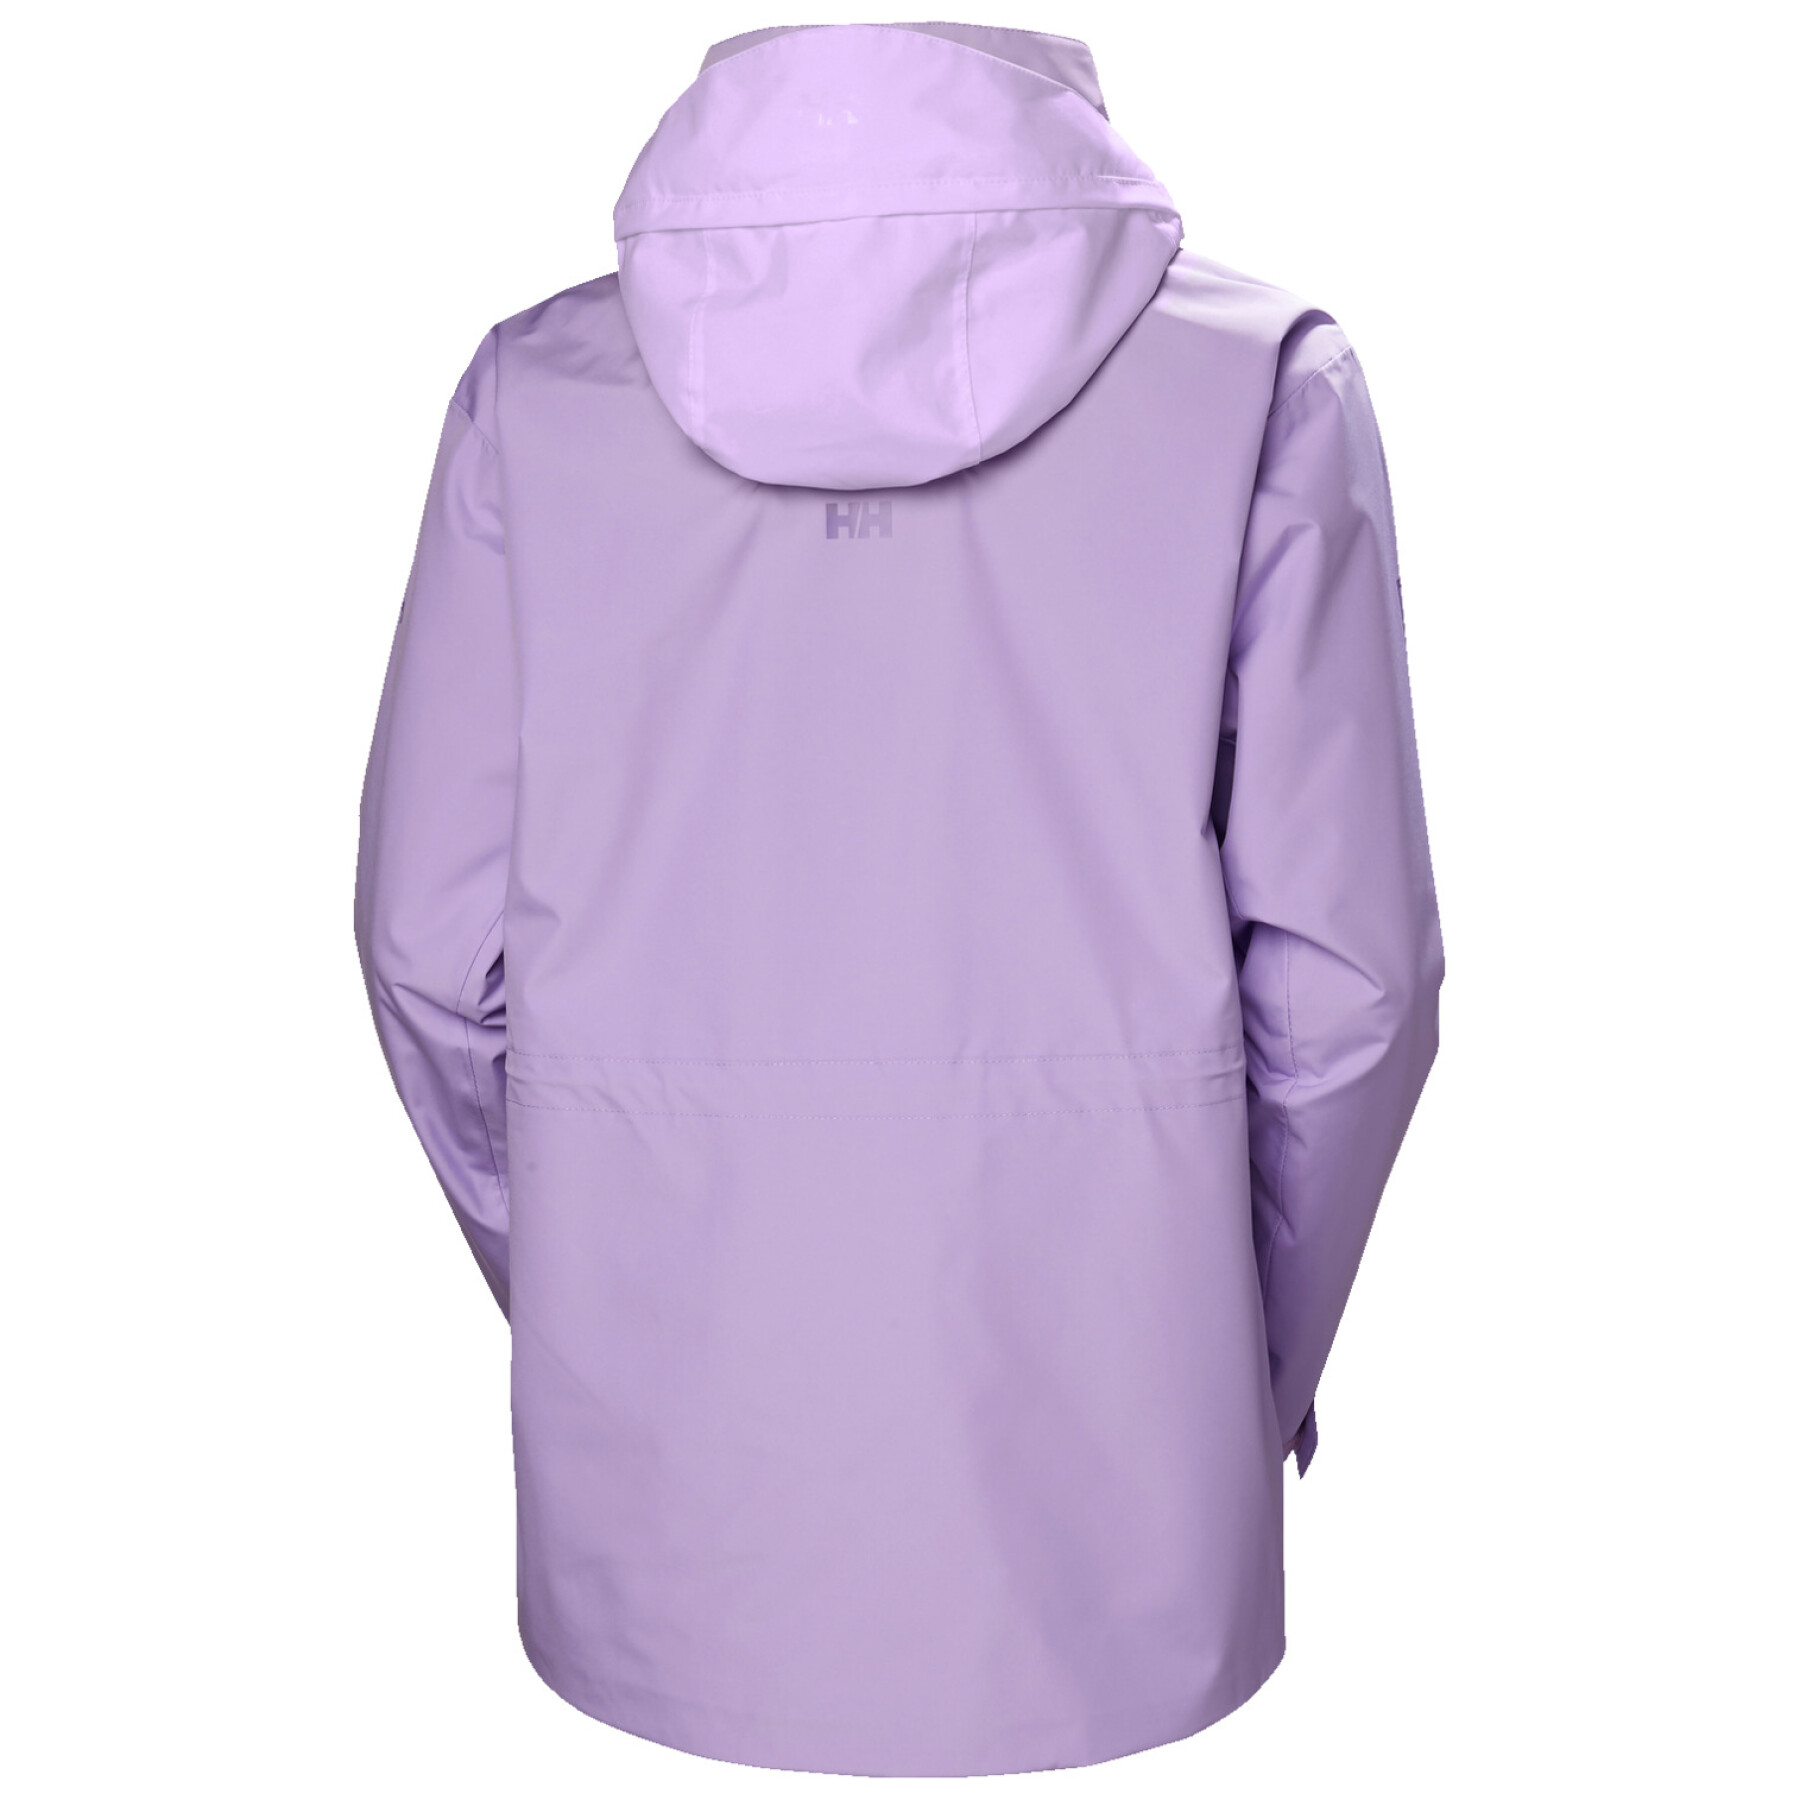 Chaqueta impermeable mujer Helly Hansen HP Racing 2.0